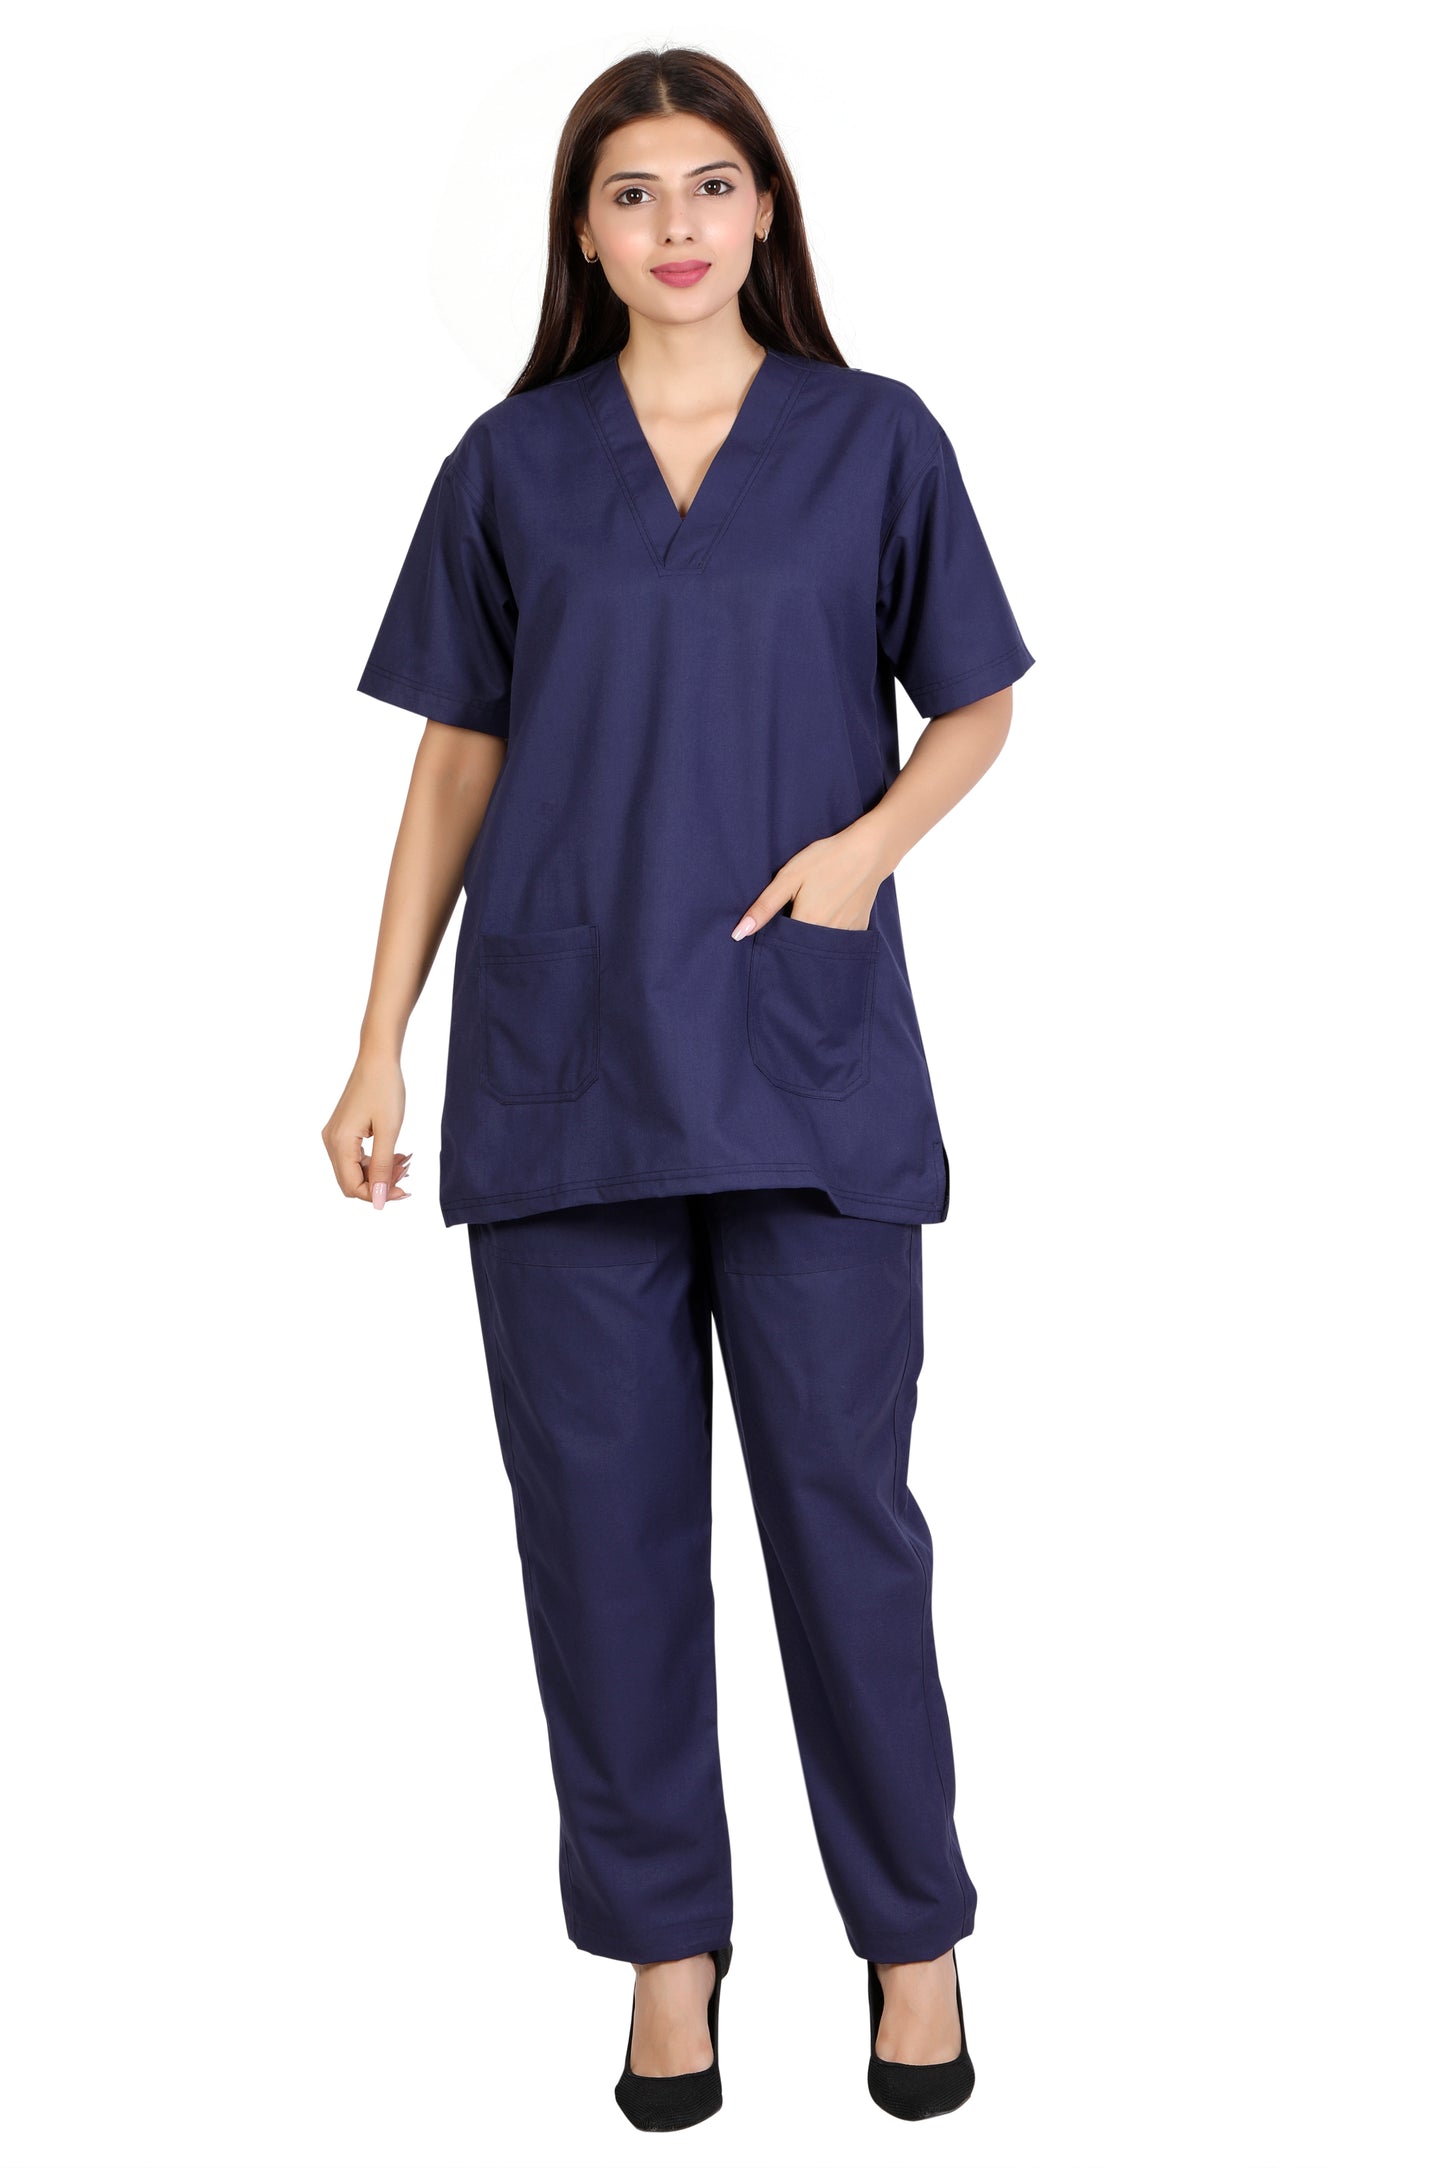 The Ultimate Surgical Scrub Suit Spectrum - Navy Blue